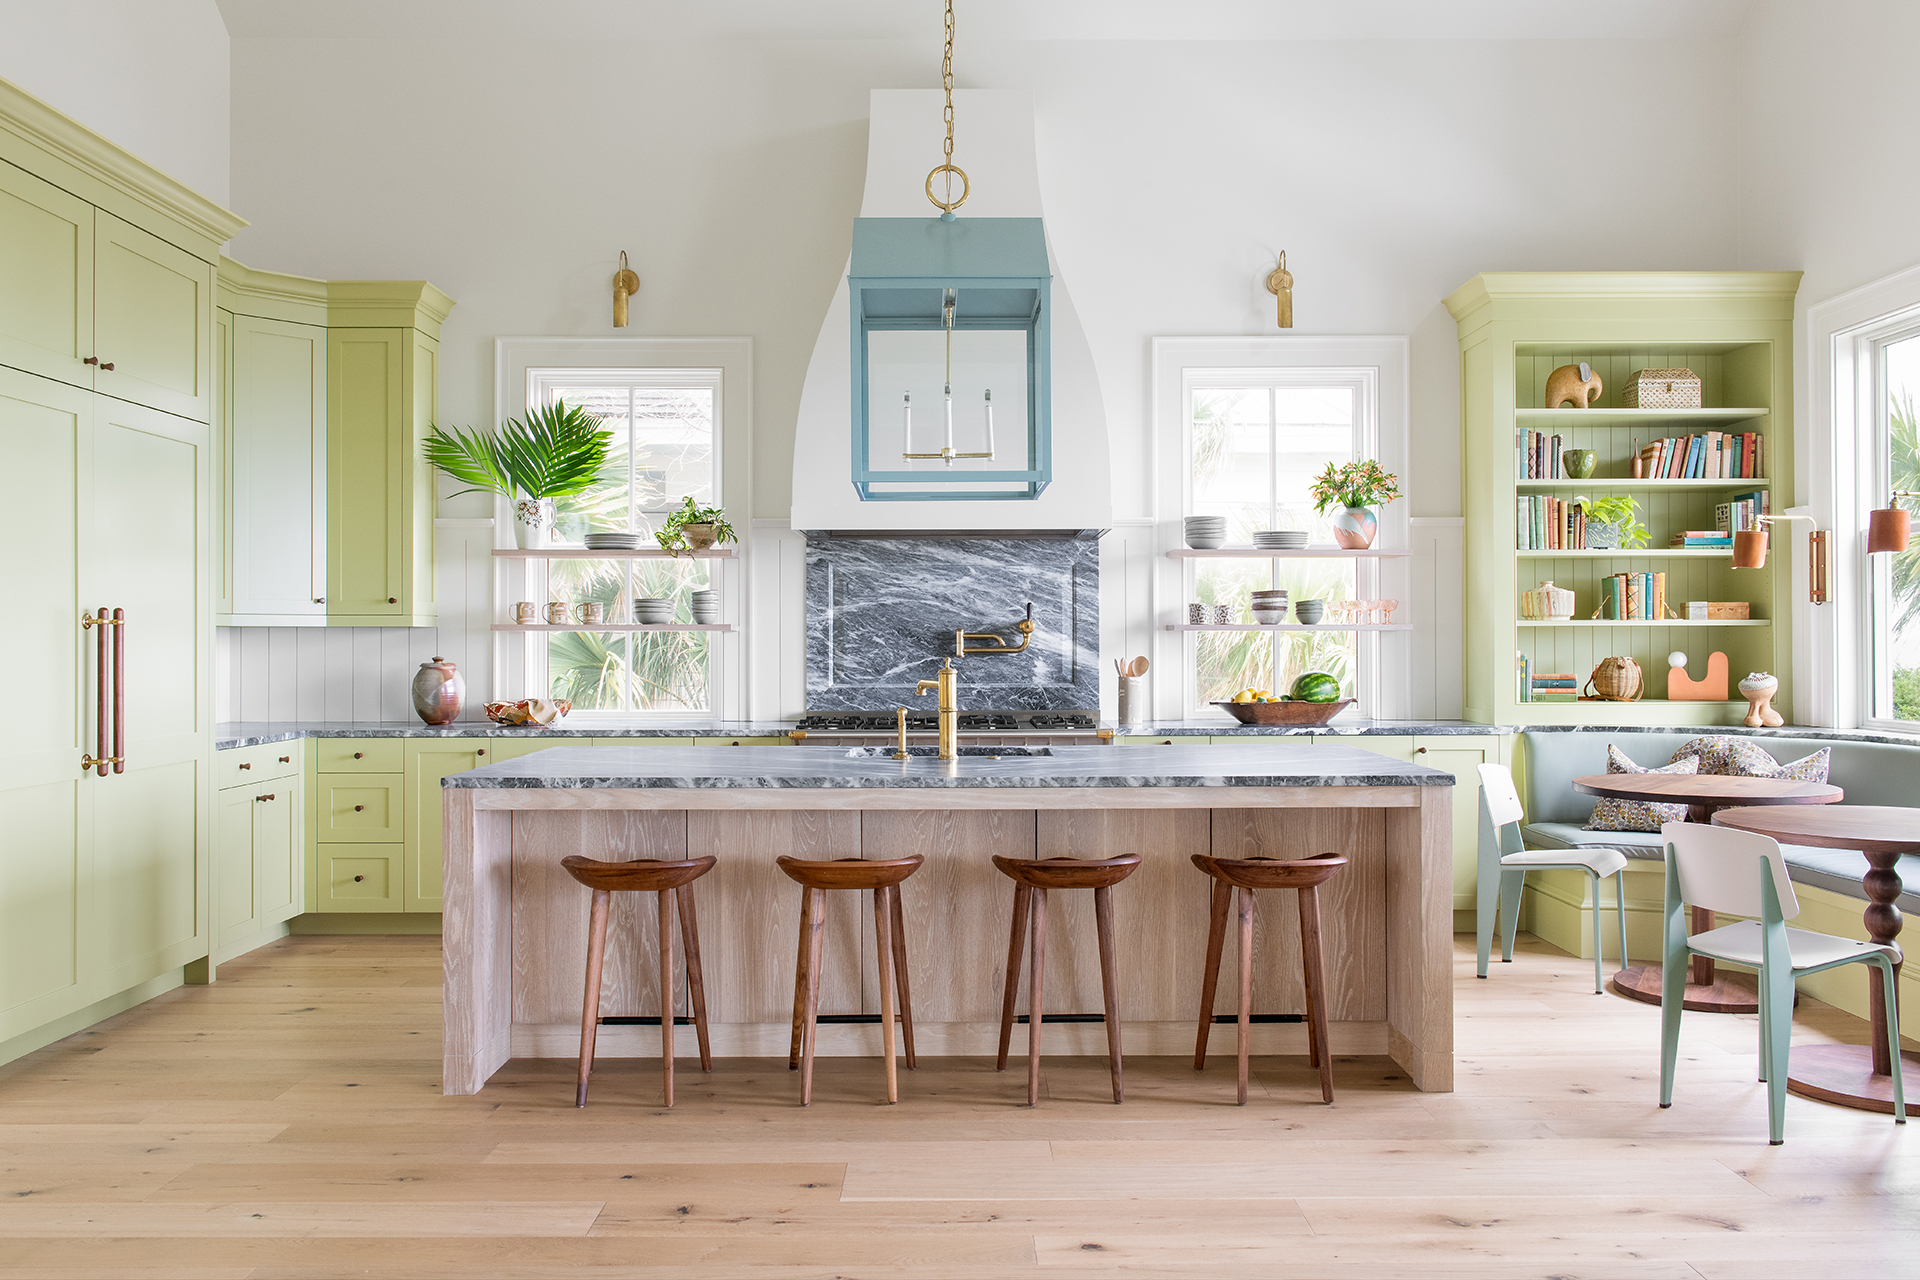 Kitchen island seating ideas: 15 ways to create comfort and style